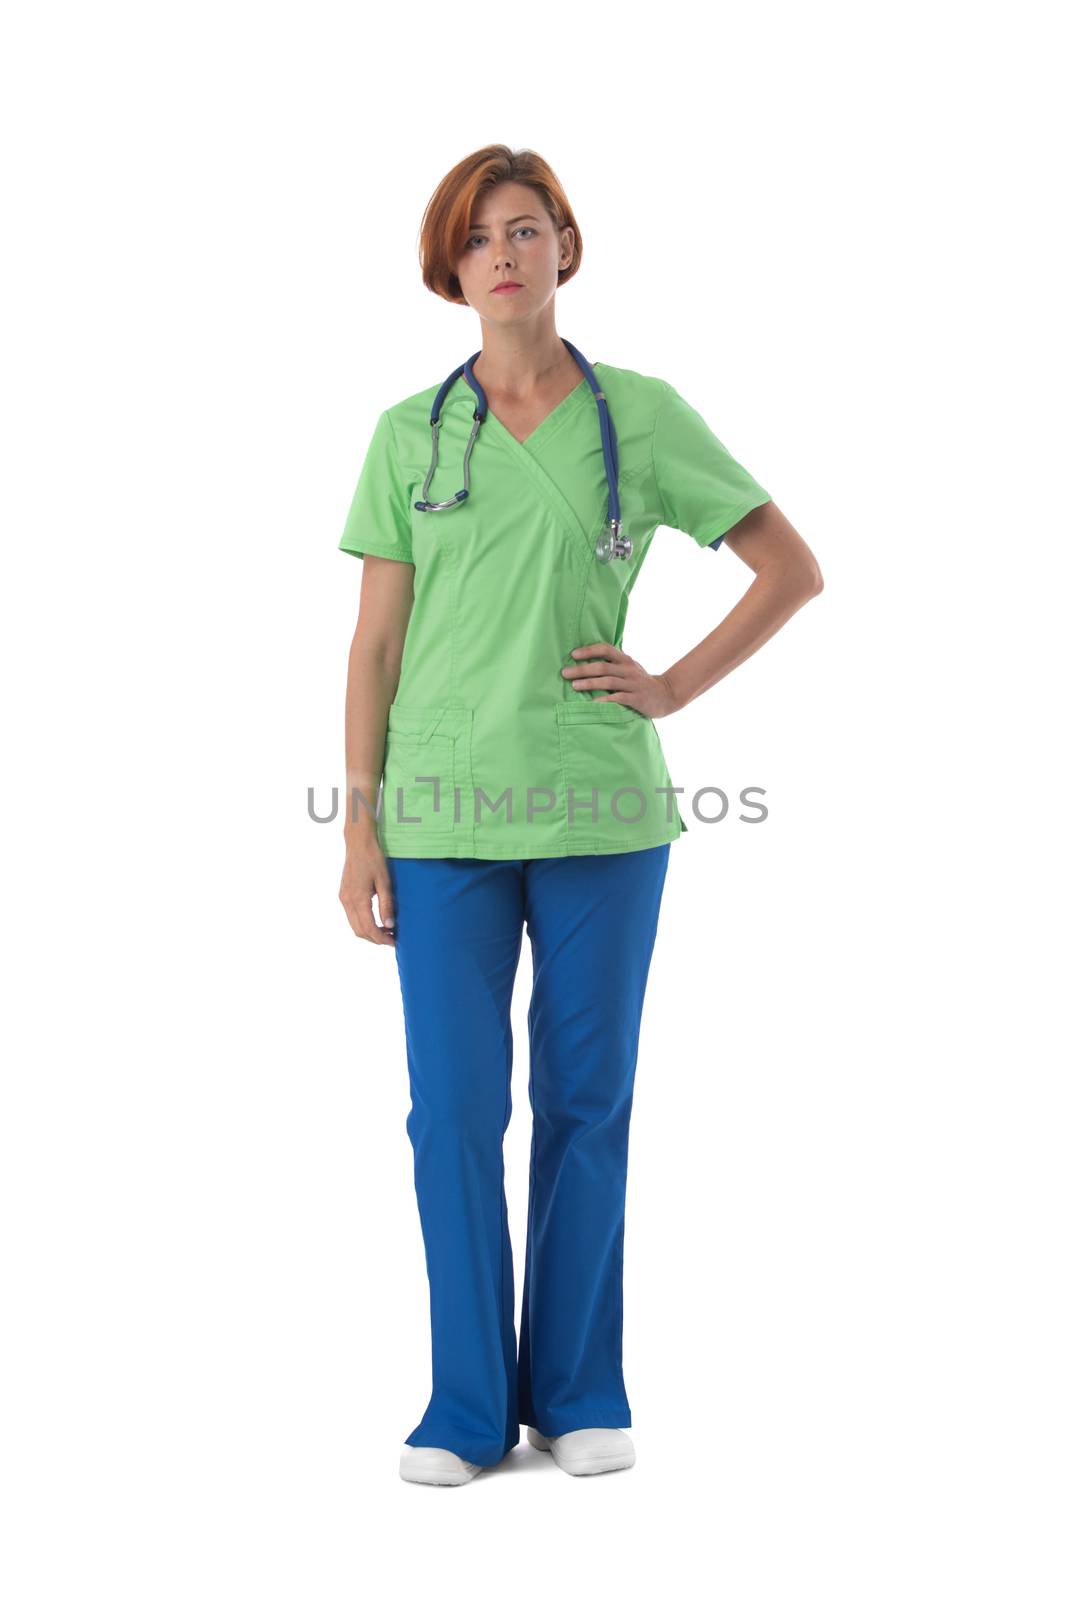 Nurse in uniform isolated on white by ALotOfPeople